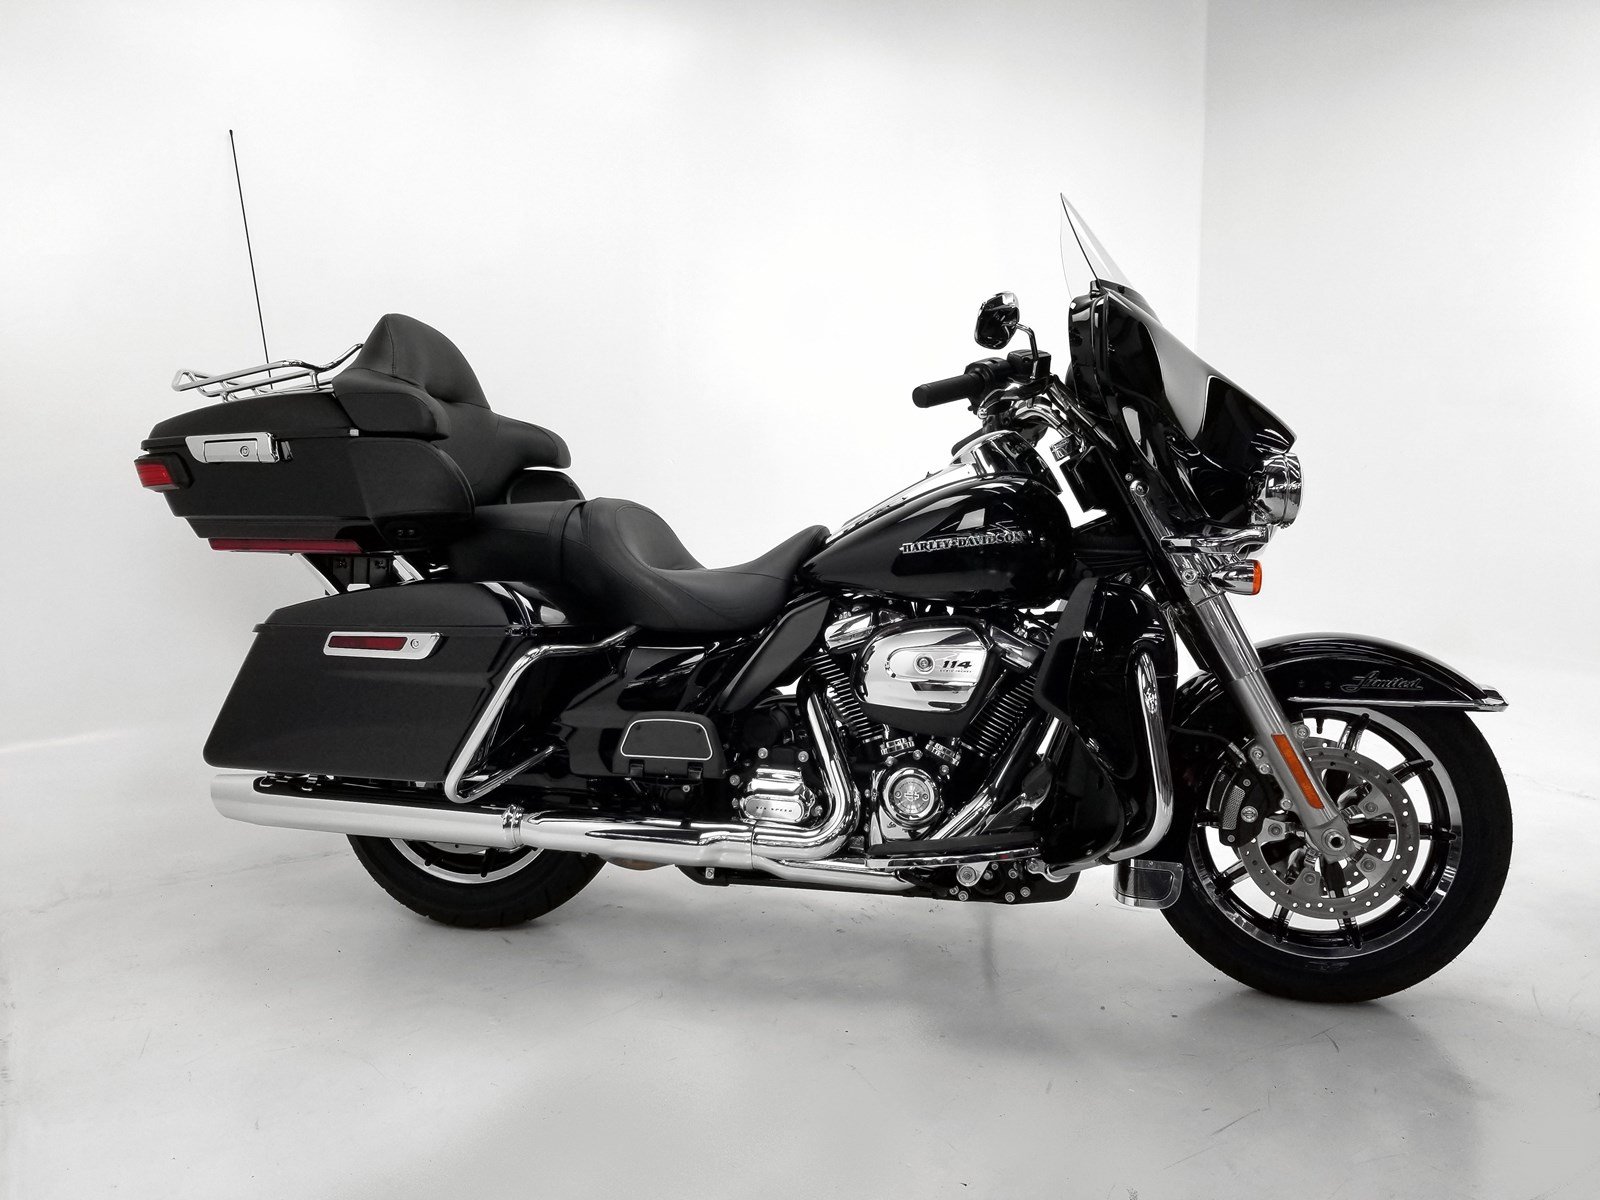 New 2019 Harley Davidson Electra Glide Ultra Limited in 